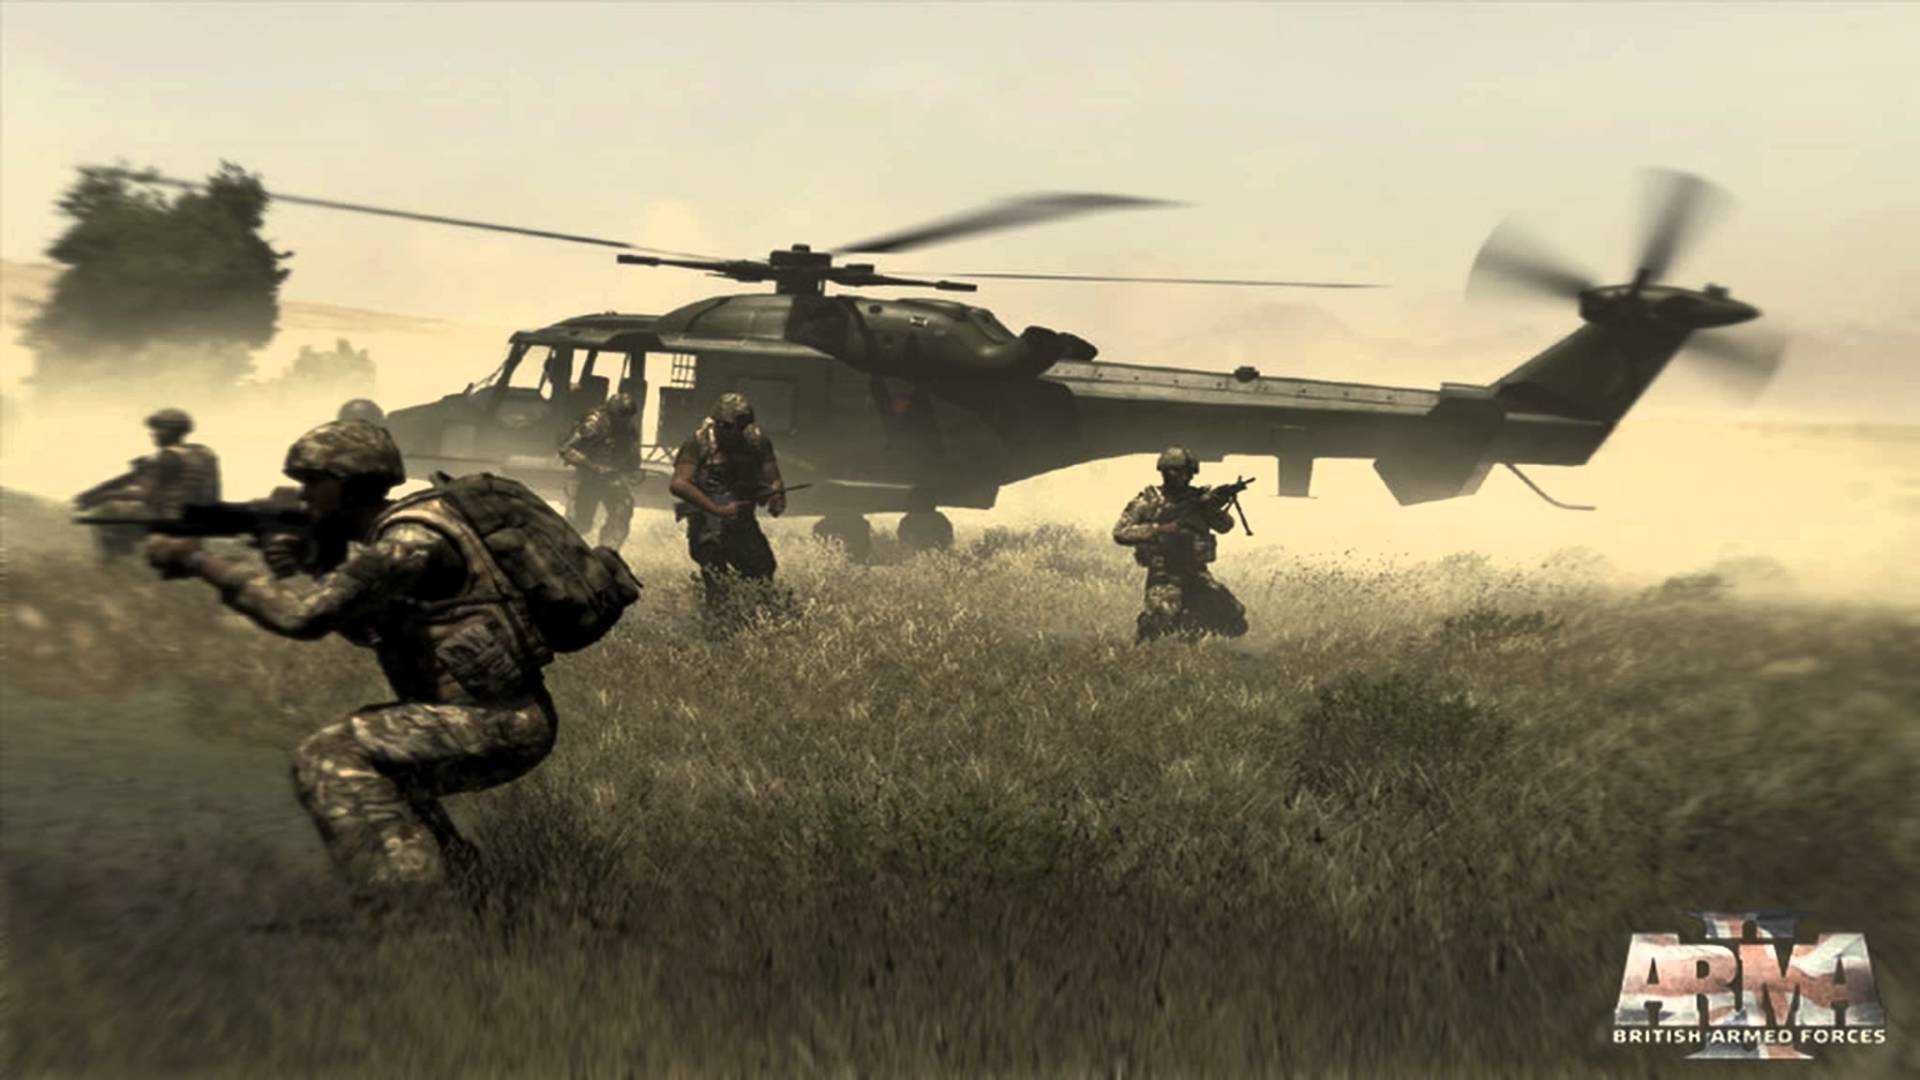 1920x1080 Collection of Army Wallpapers Hd on HDWallpapers